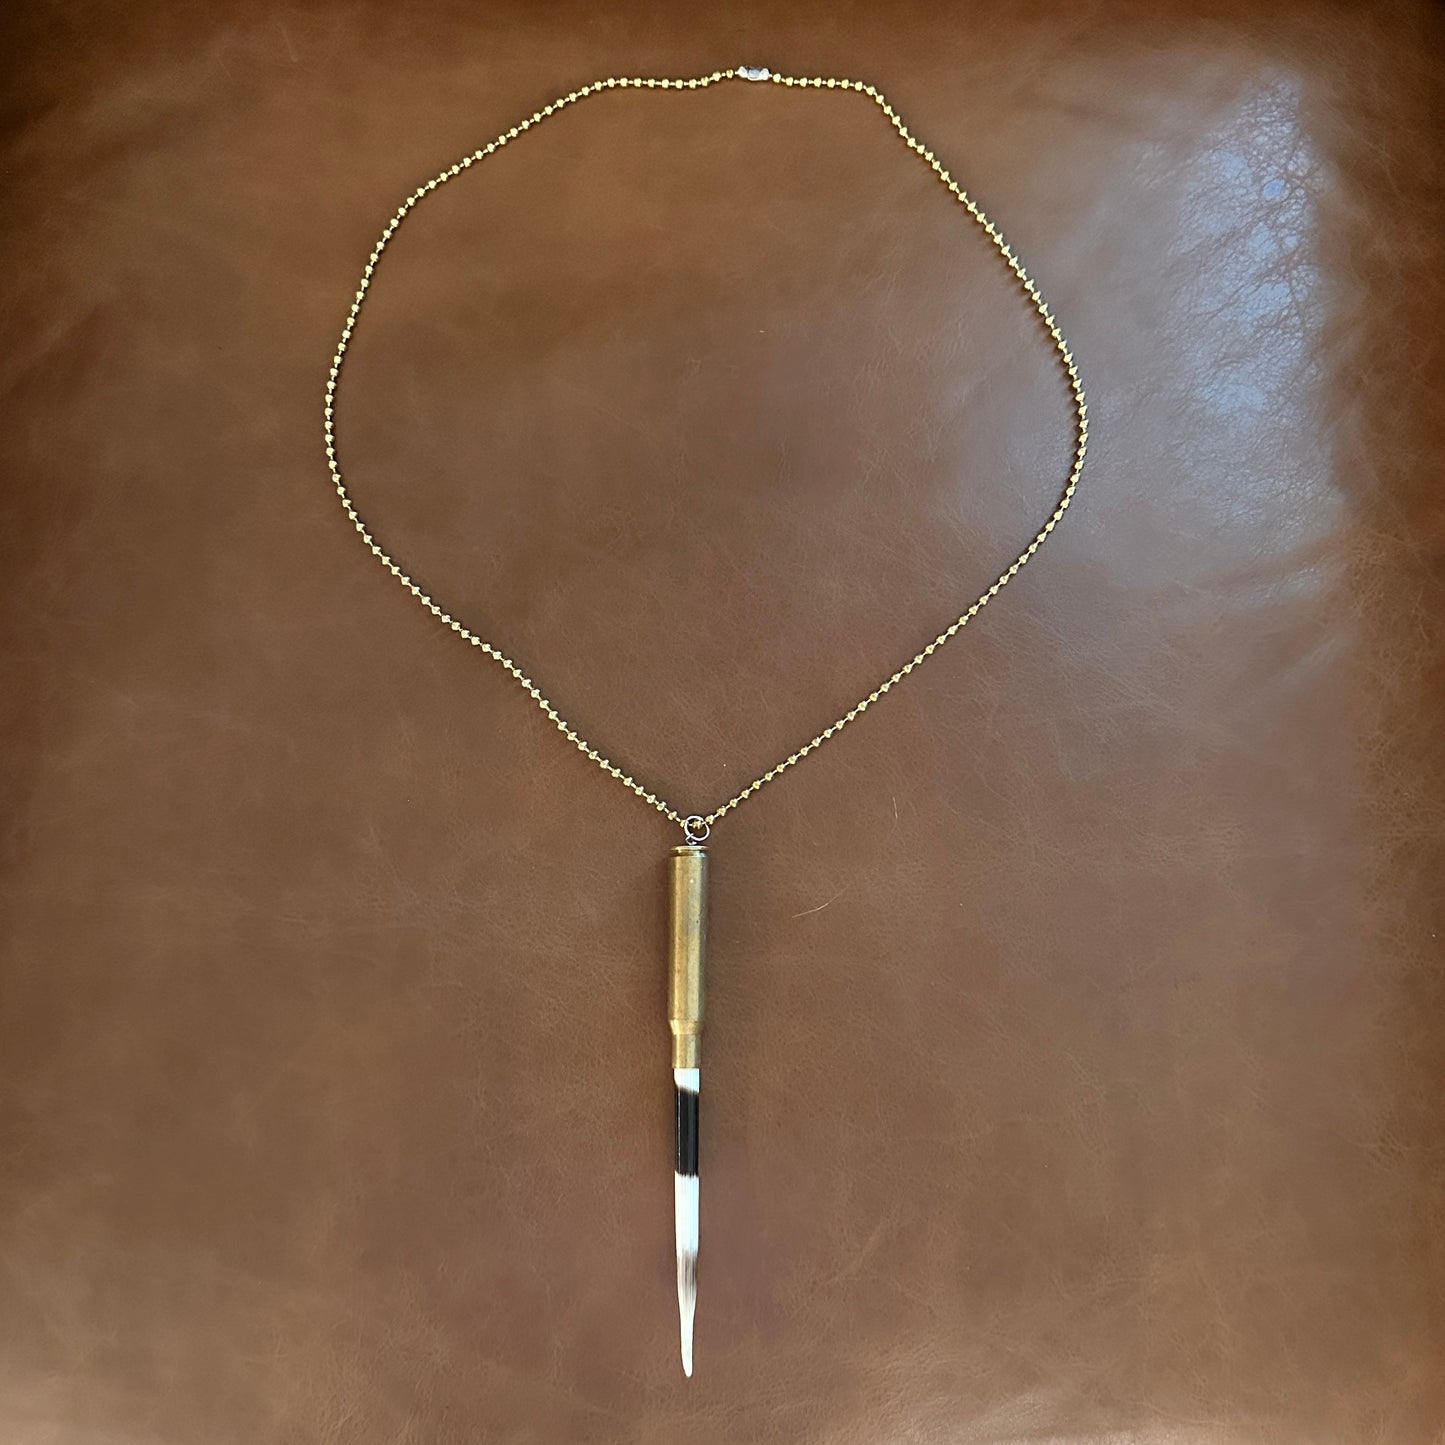 Yellowstone Beth Dutton Porcupine Quill in Brass Necklace